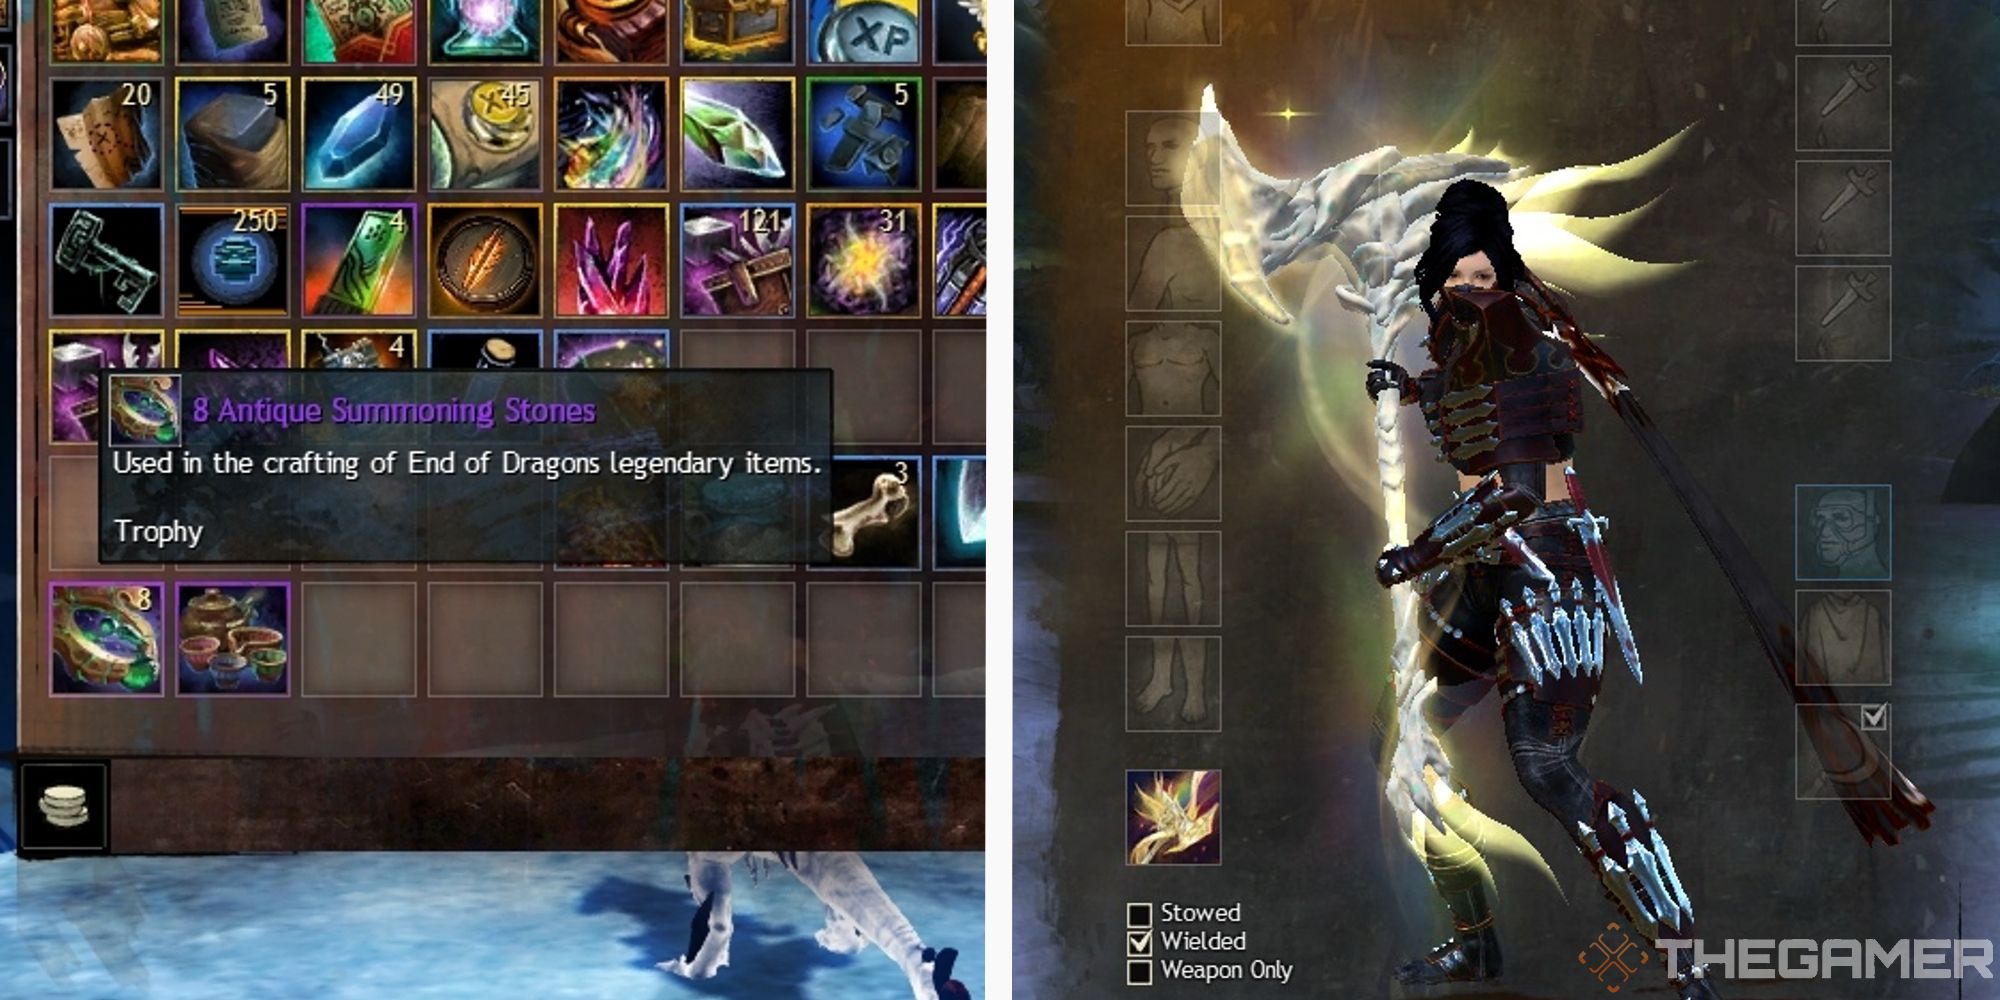 image of antique summoning stones in player inventory, next to image of player holding aurene's weight